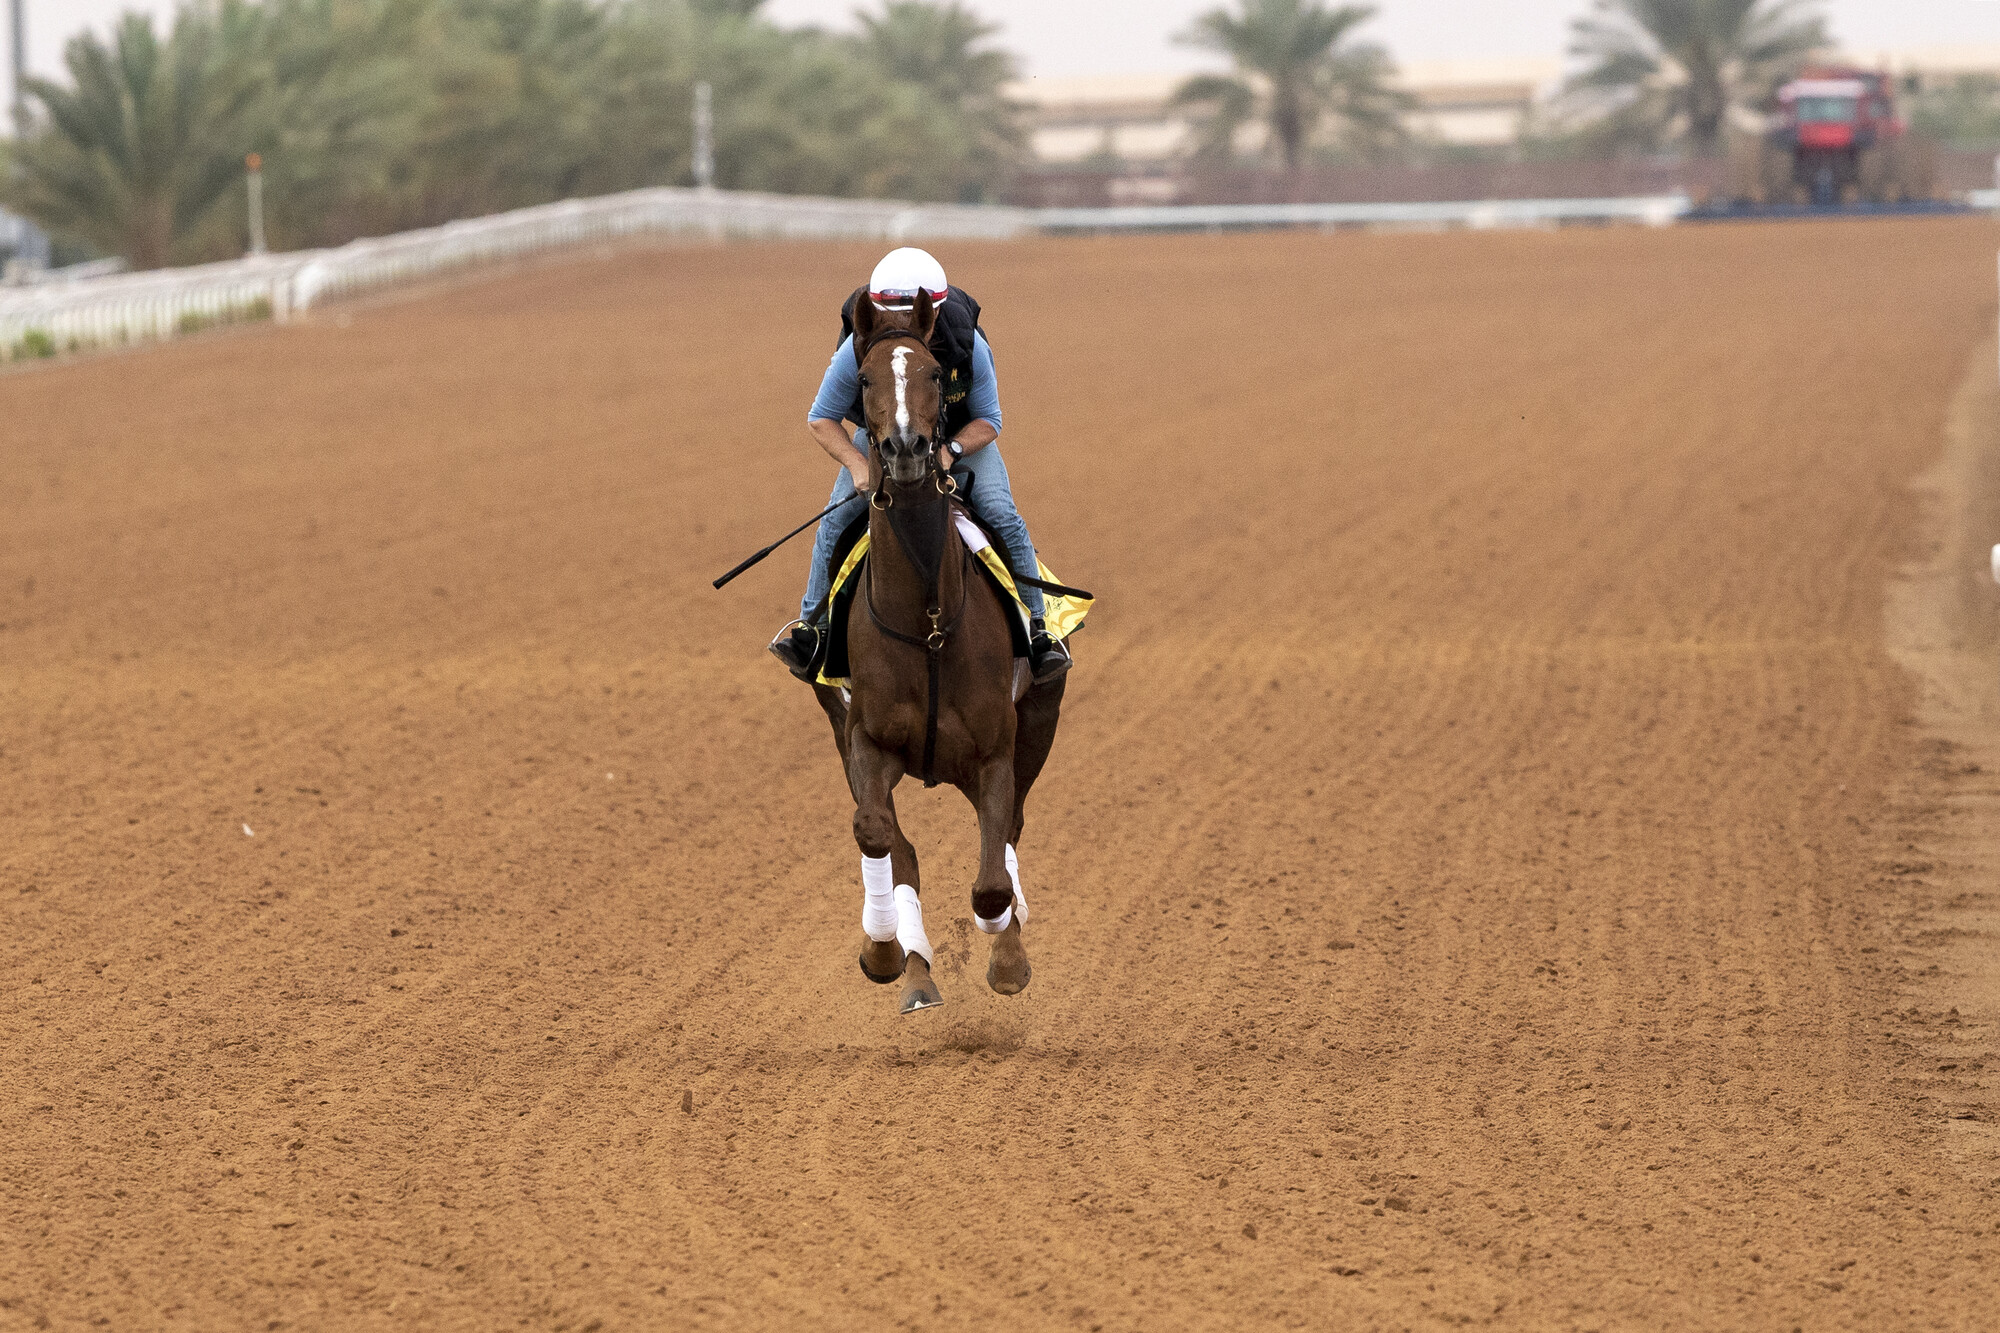 Splendid isolation: The Bill Mott-trained Channel Maker, who may be favourite for the $1 million Neom Turf Cup on Saturday, takes a spin on the dirt track on Thursday. Photo: Mathea Kelley/Jockey Club of Saudi Arabia